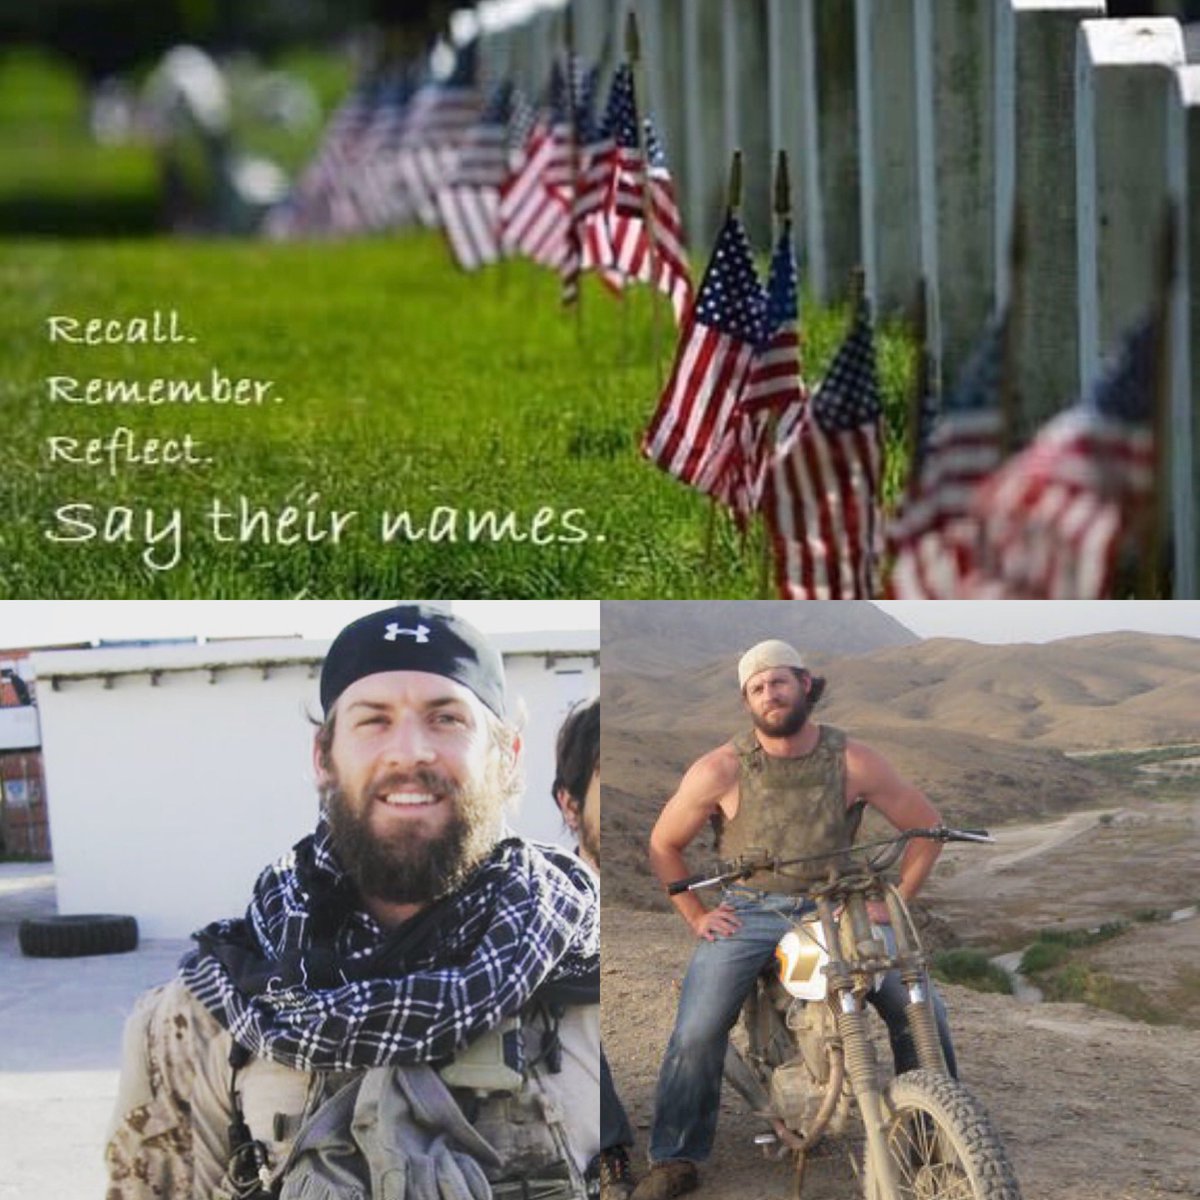 We remember Brendan and all those who have paid the ultimate sacrifice this weekend and every day. #FreedomIsNotFree #BeStrong #BeAccountable #NeverComplain 🇺🇸